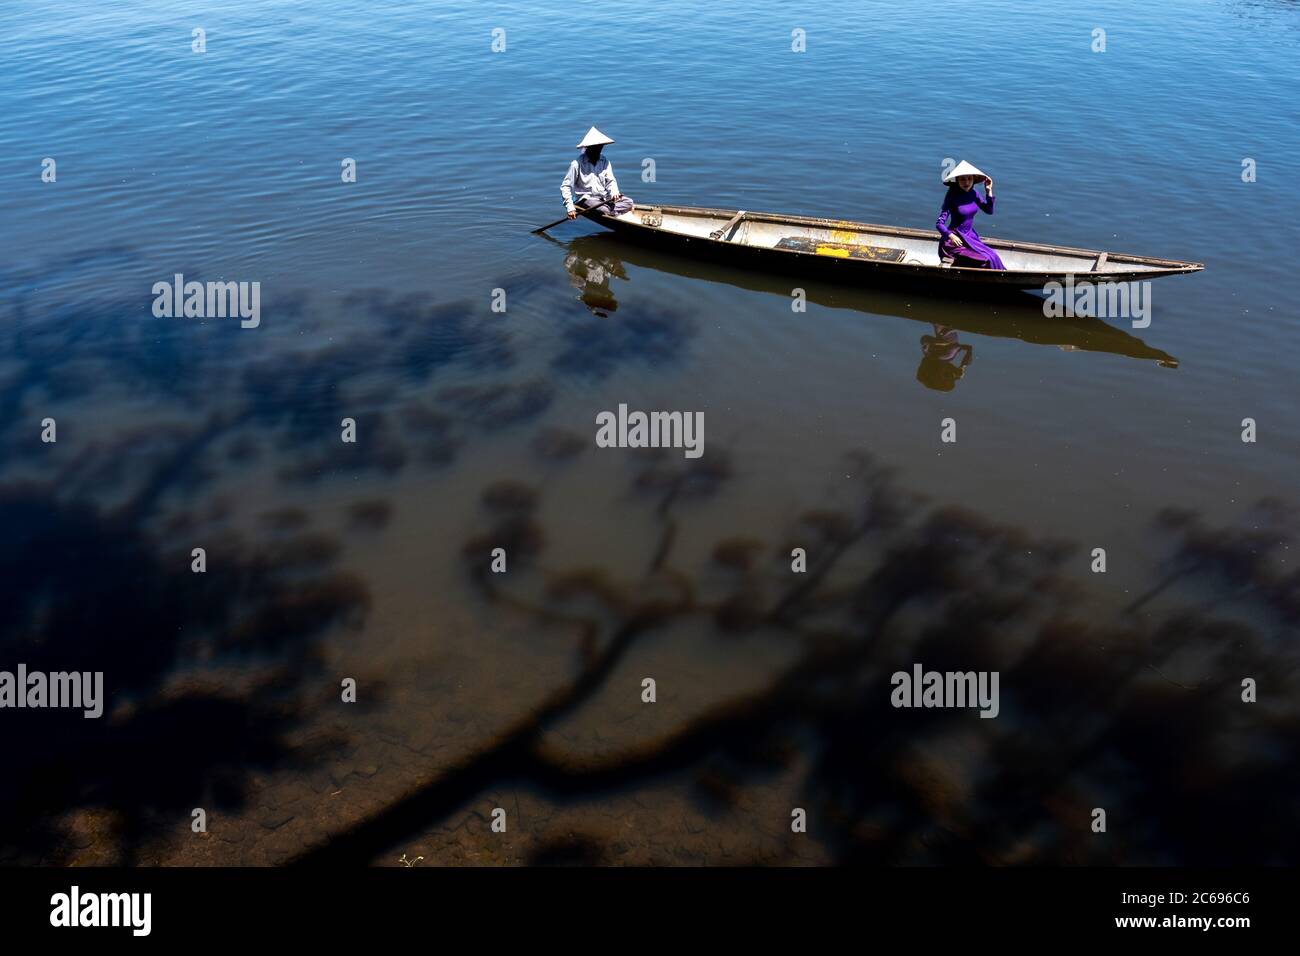 Two women in traditional clothing sitting in a boat, Vietnam Stock Photo